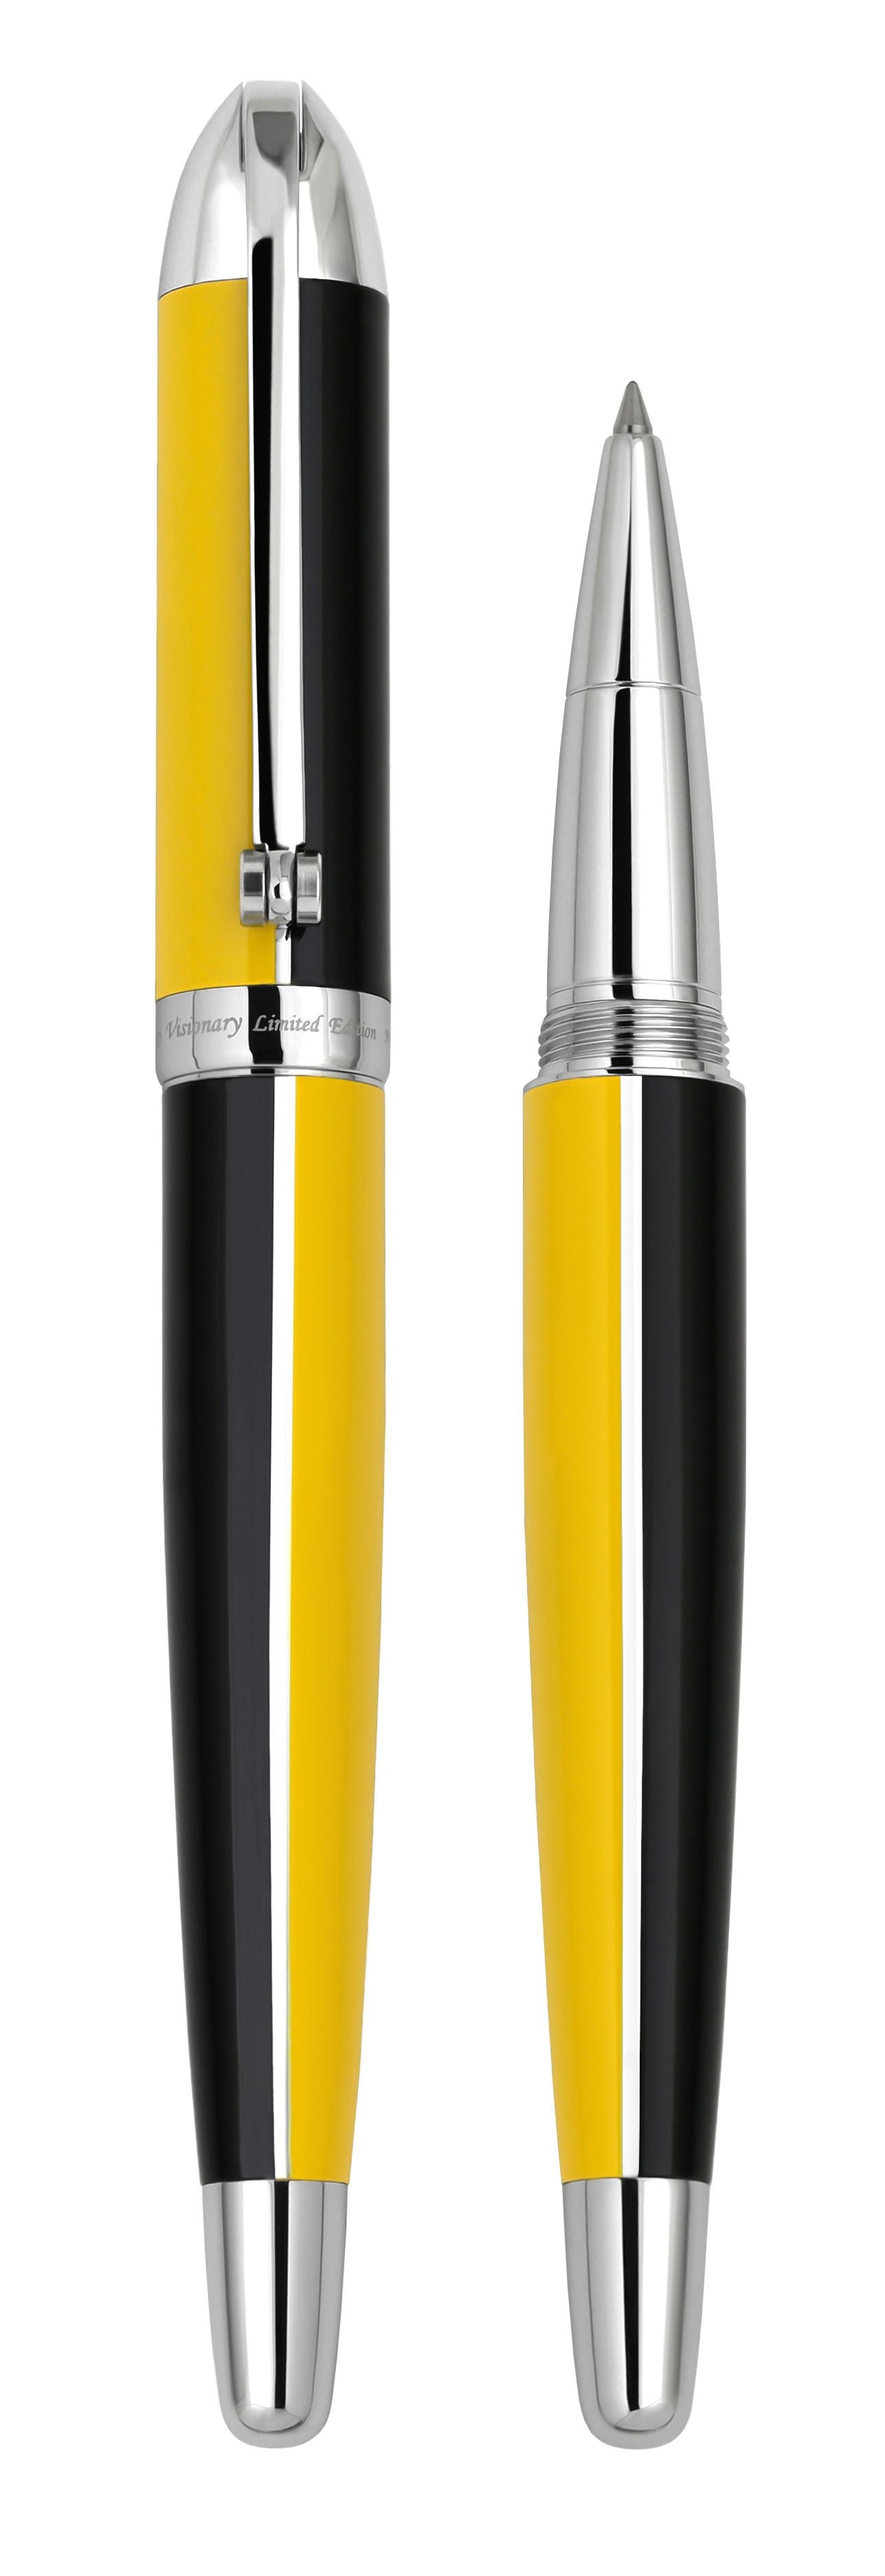 Xezo - Vertical view of two Visionary Speed Yellow/Black R rollerball pens. The pen on the left is capped, and the pen on the right has no cap